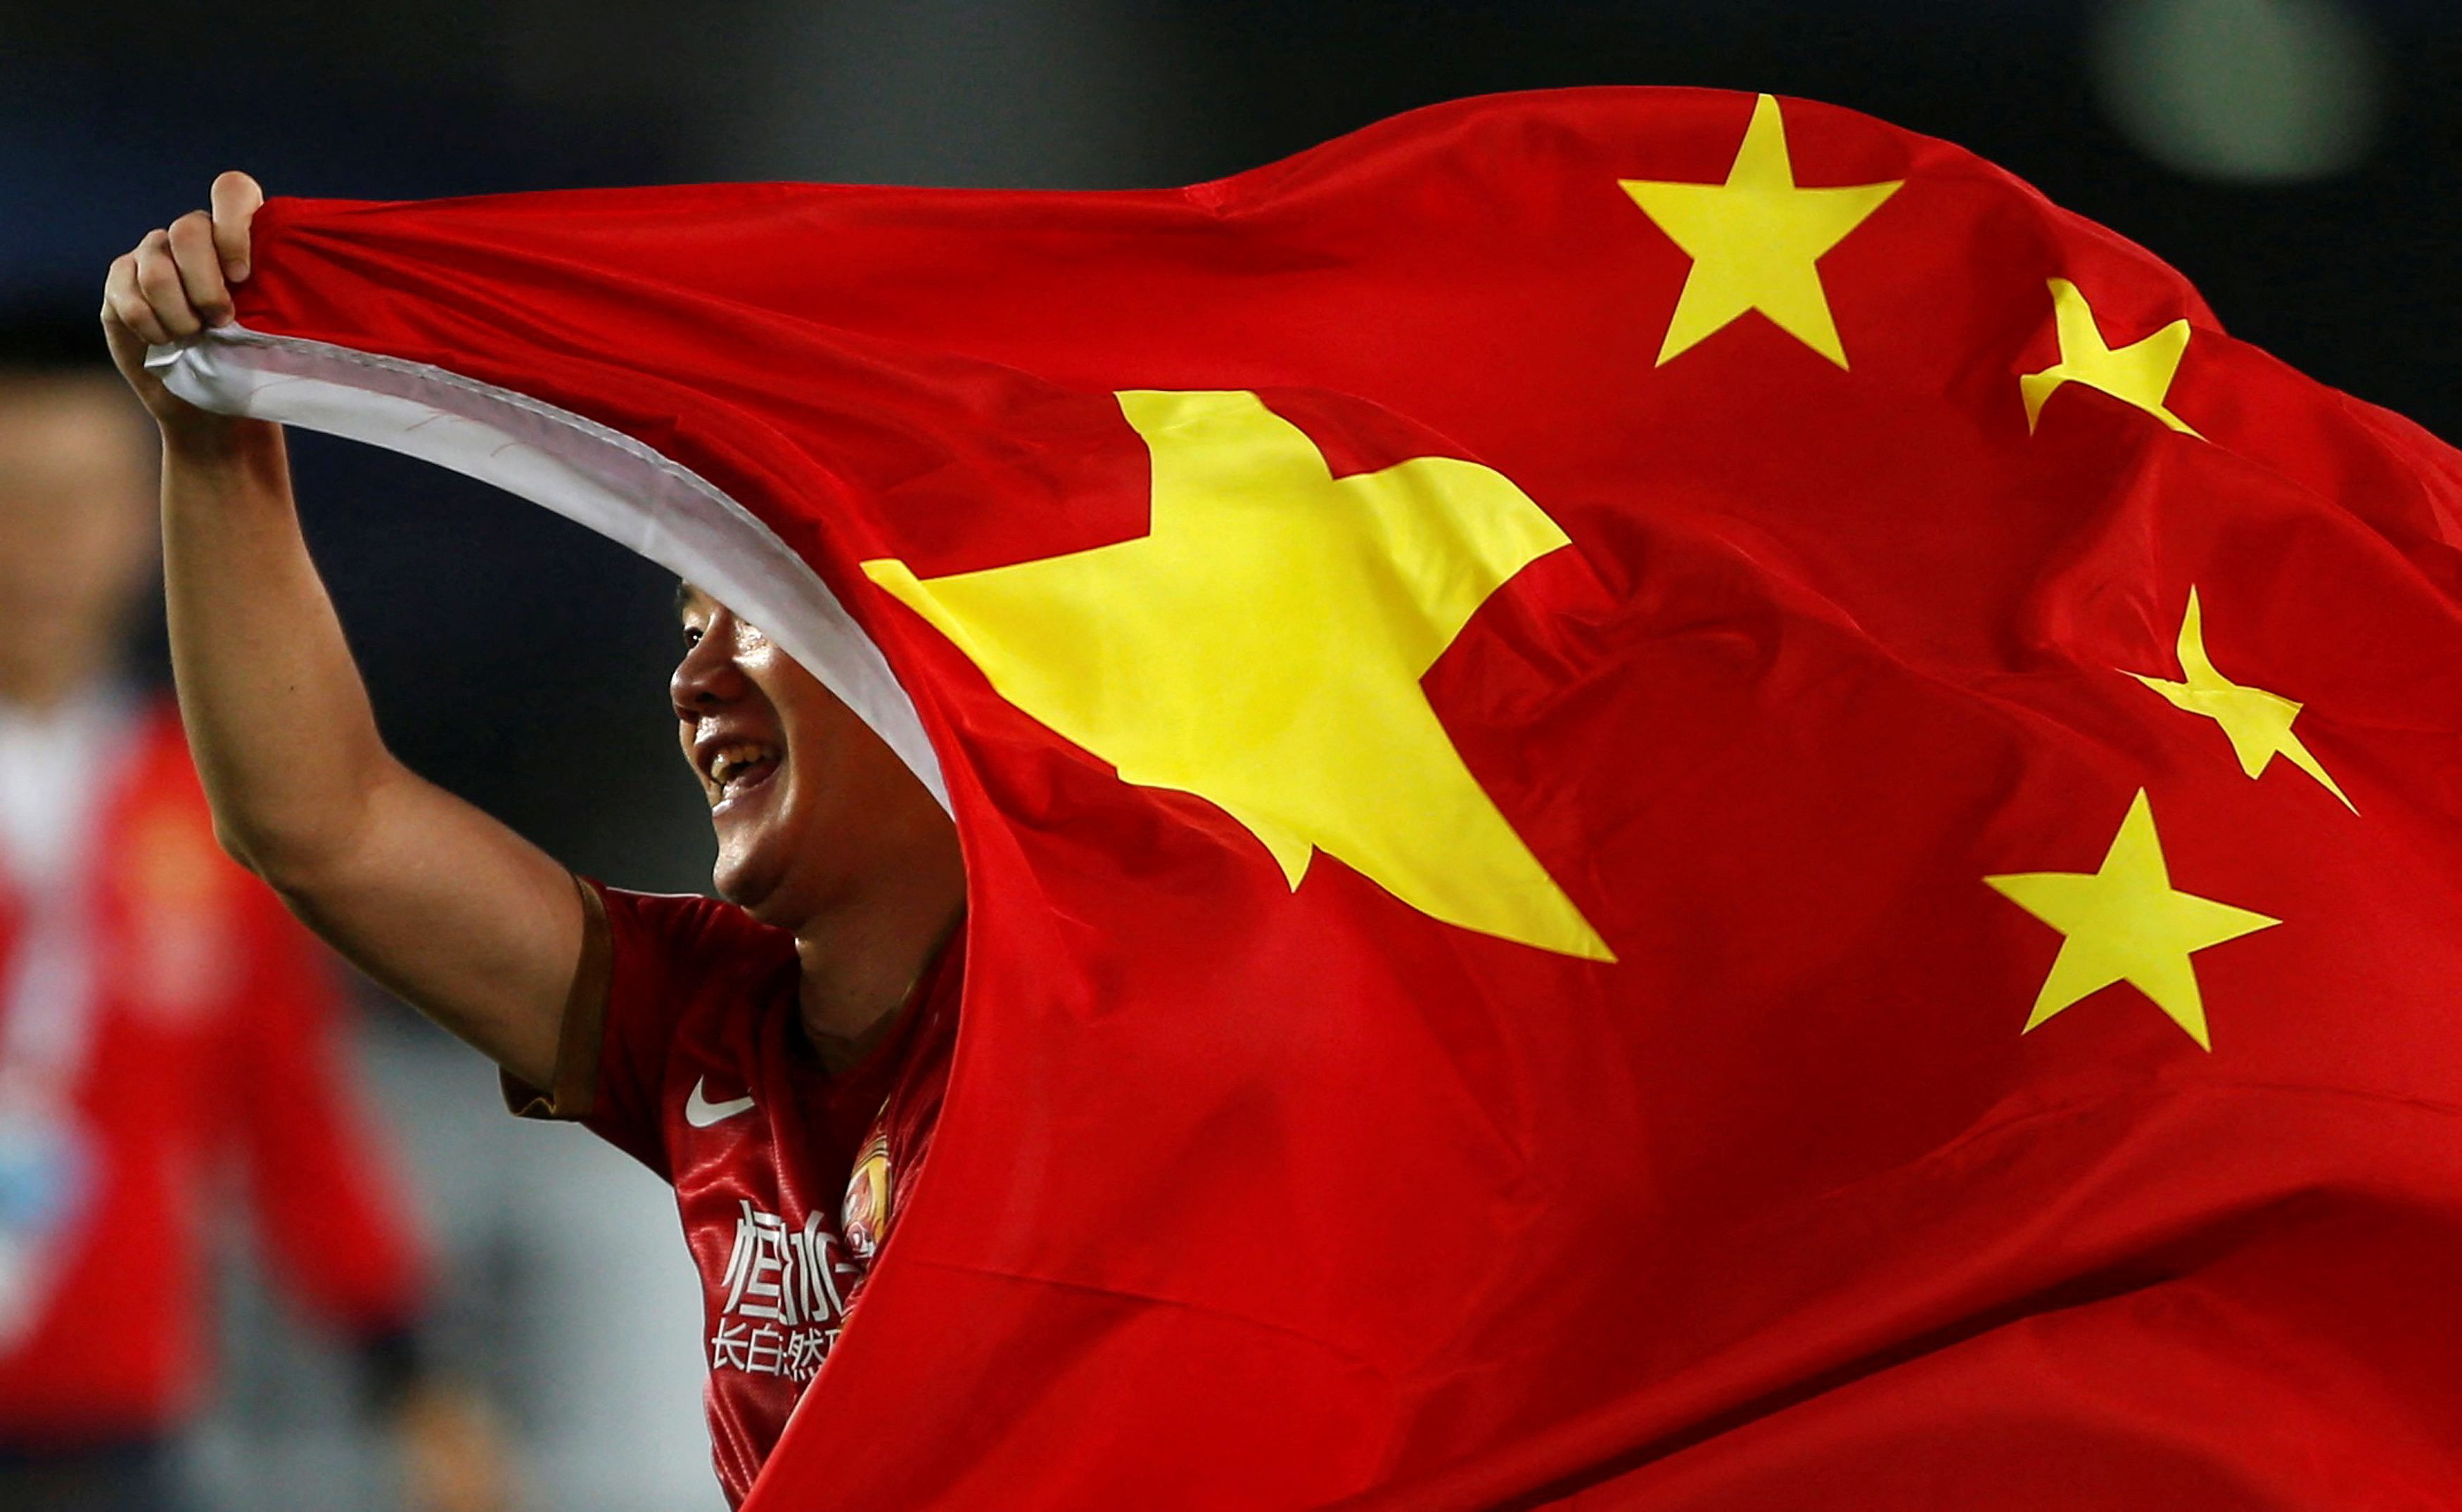 Huang Bowen of China's Guangzhou Evergrande celebrates with the national flag after winning the team's final match of the AFC Champions' League against South Korea's FC Seoul in Guangzhou